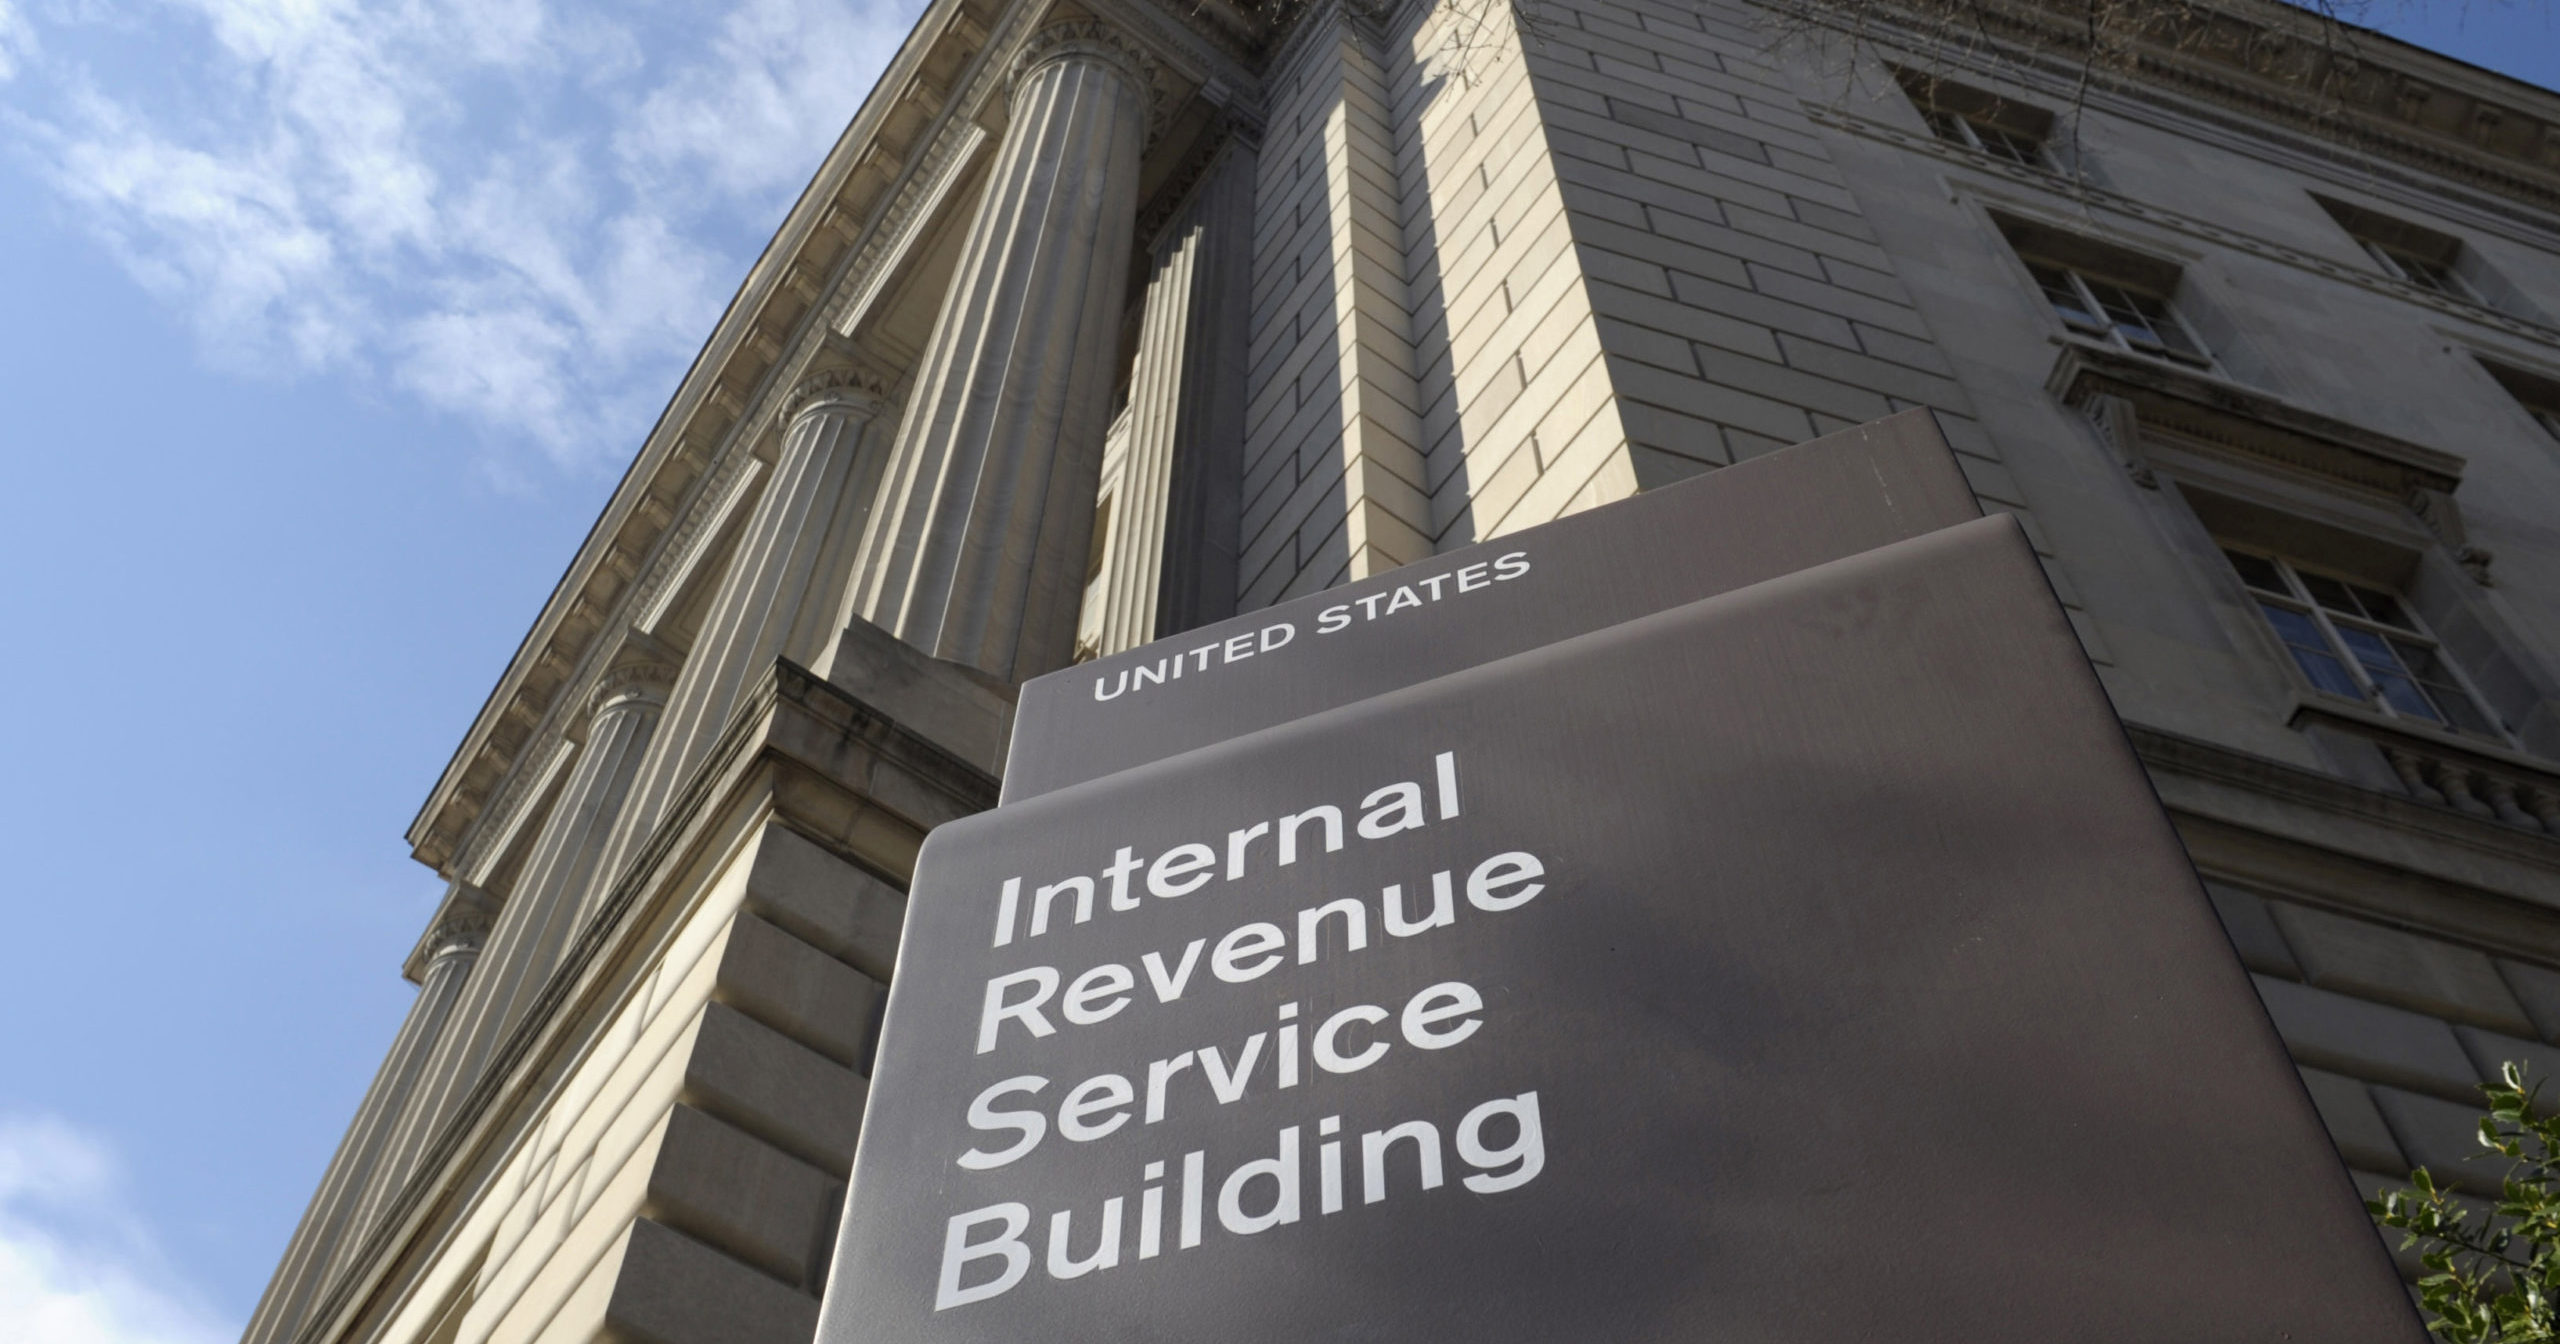 The exterior of the Internal Revenue Service building is seen in Washington, D.C., on March 22, 2013.